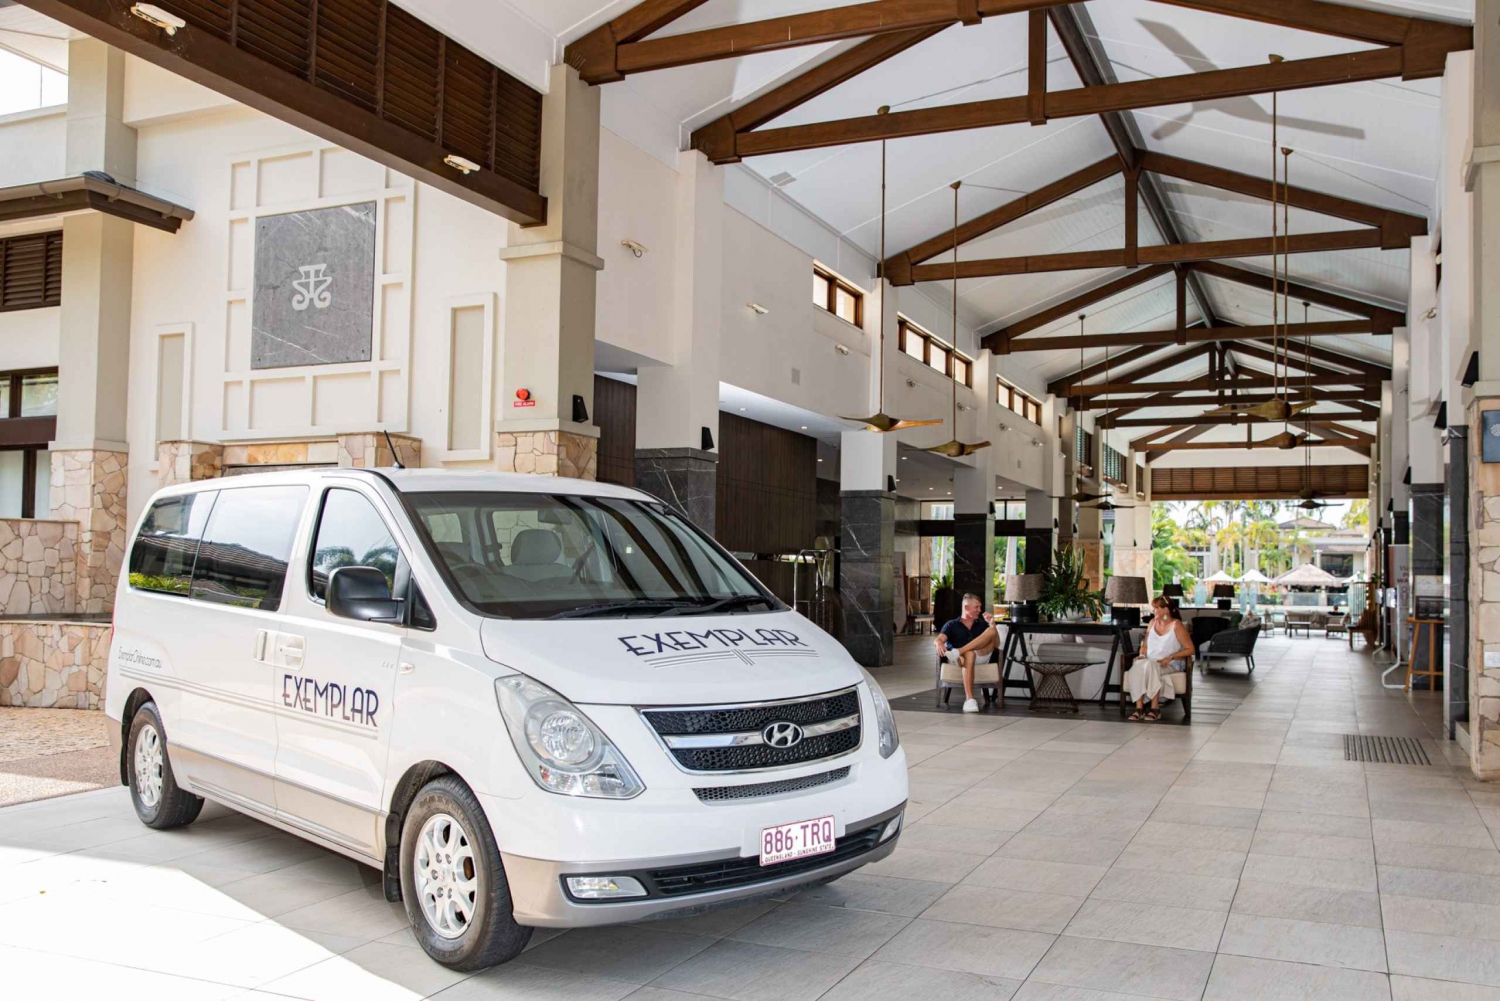 Cairns Airport and Port Douglas Private Transfers